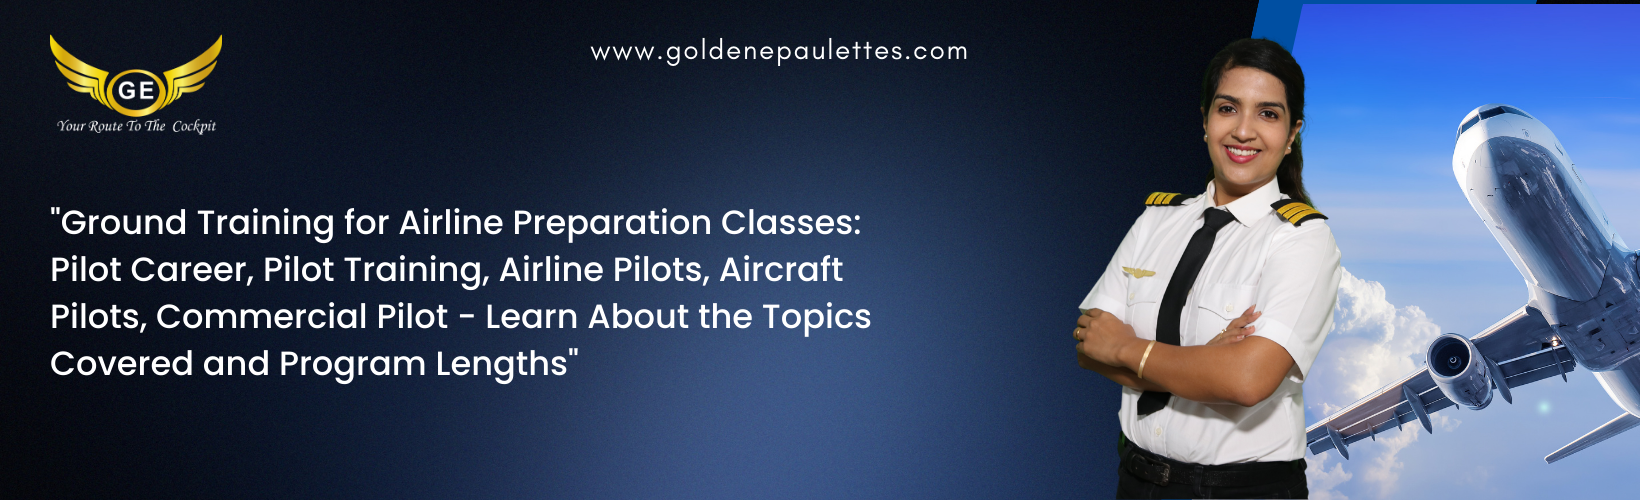 Understanding the Syllabus for Airline Preparation Classes